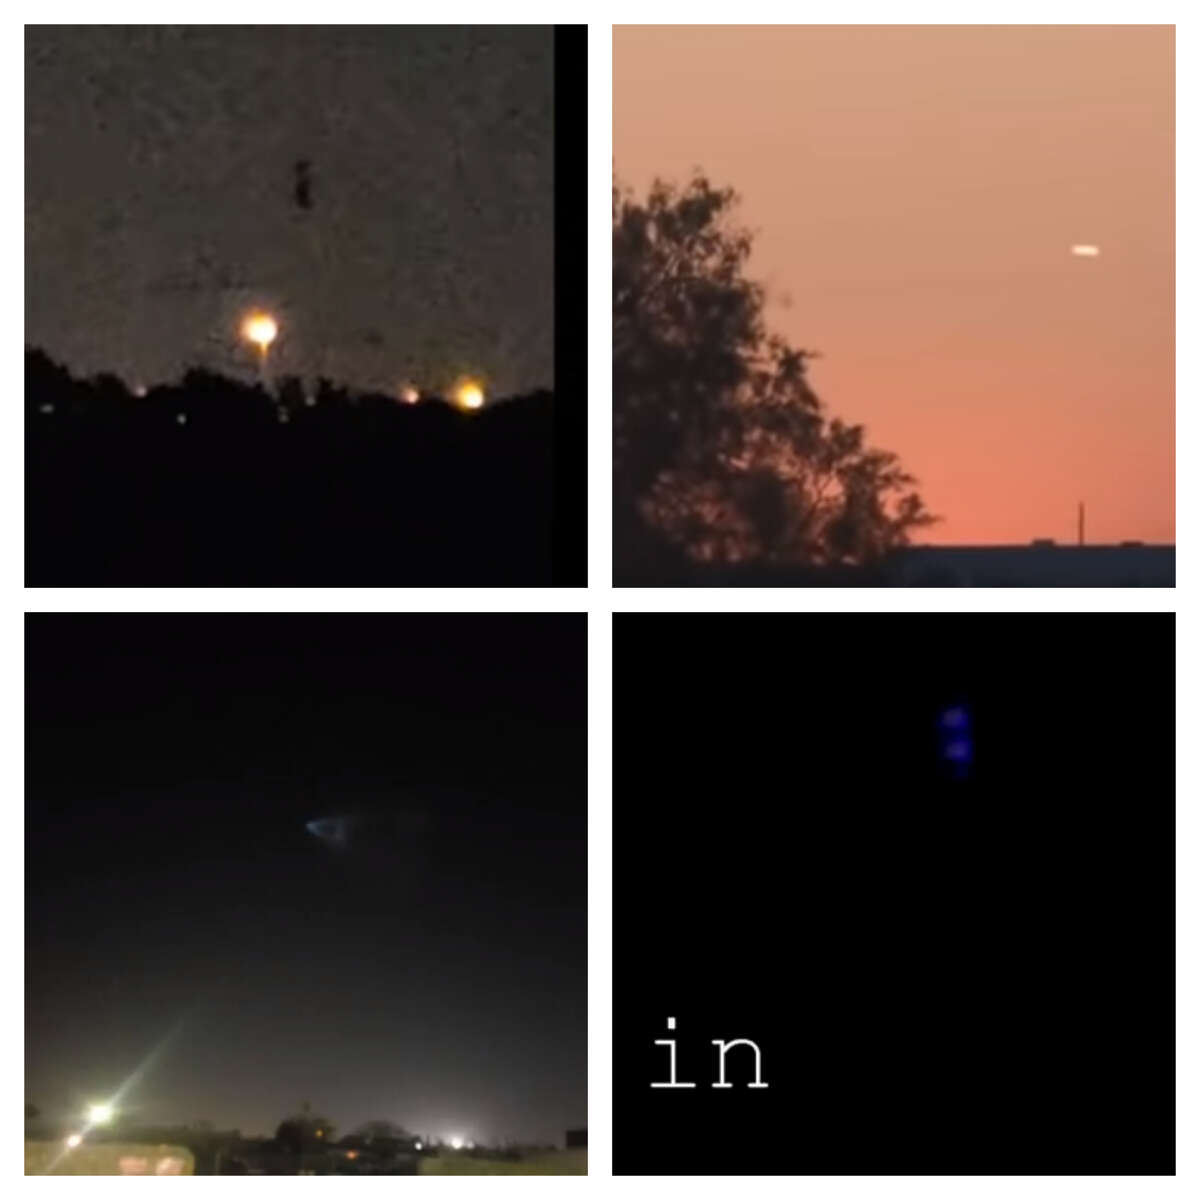 Aliens or hoaxes? More than 70 UFO sightings reported in Texas in 2018